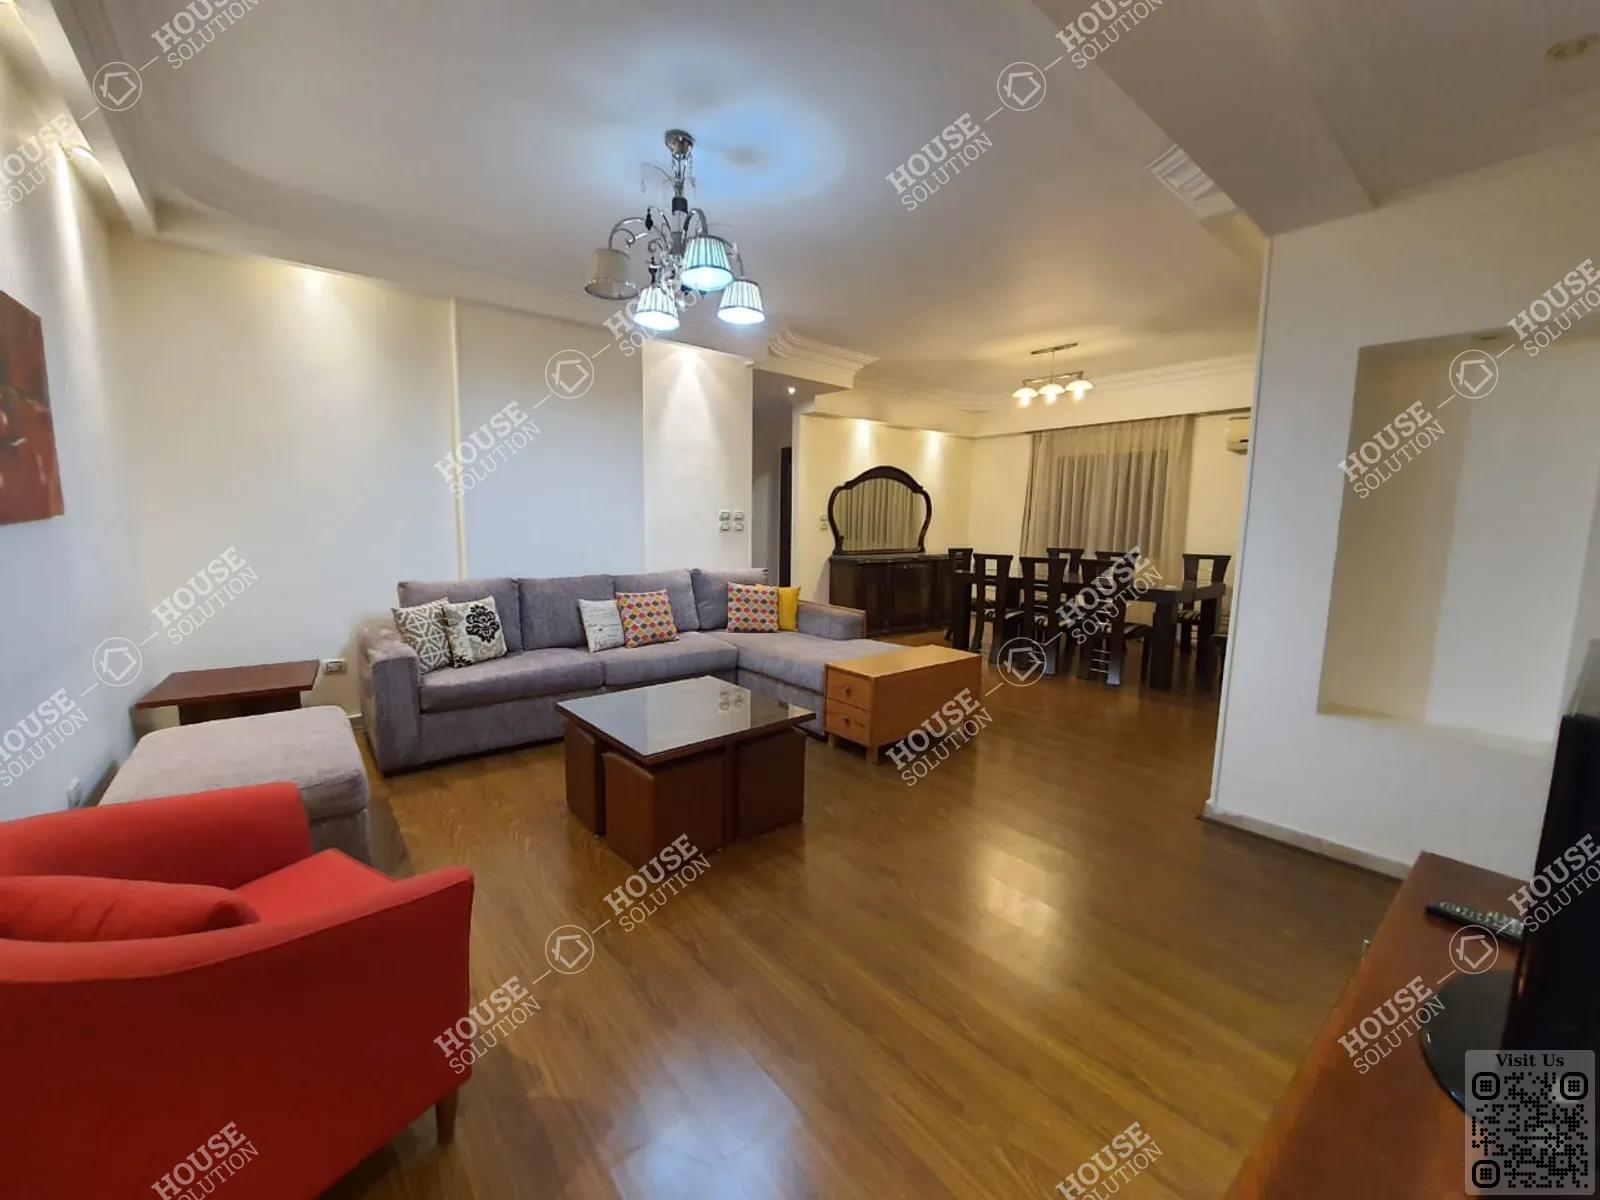 RECEPTION  @ Apartments For Rent In Maadi Maadi Degla Area: 180 m² consists of 3 Bedrooms 3 Bathrooms Modern furnished 5 stars #4319-0